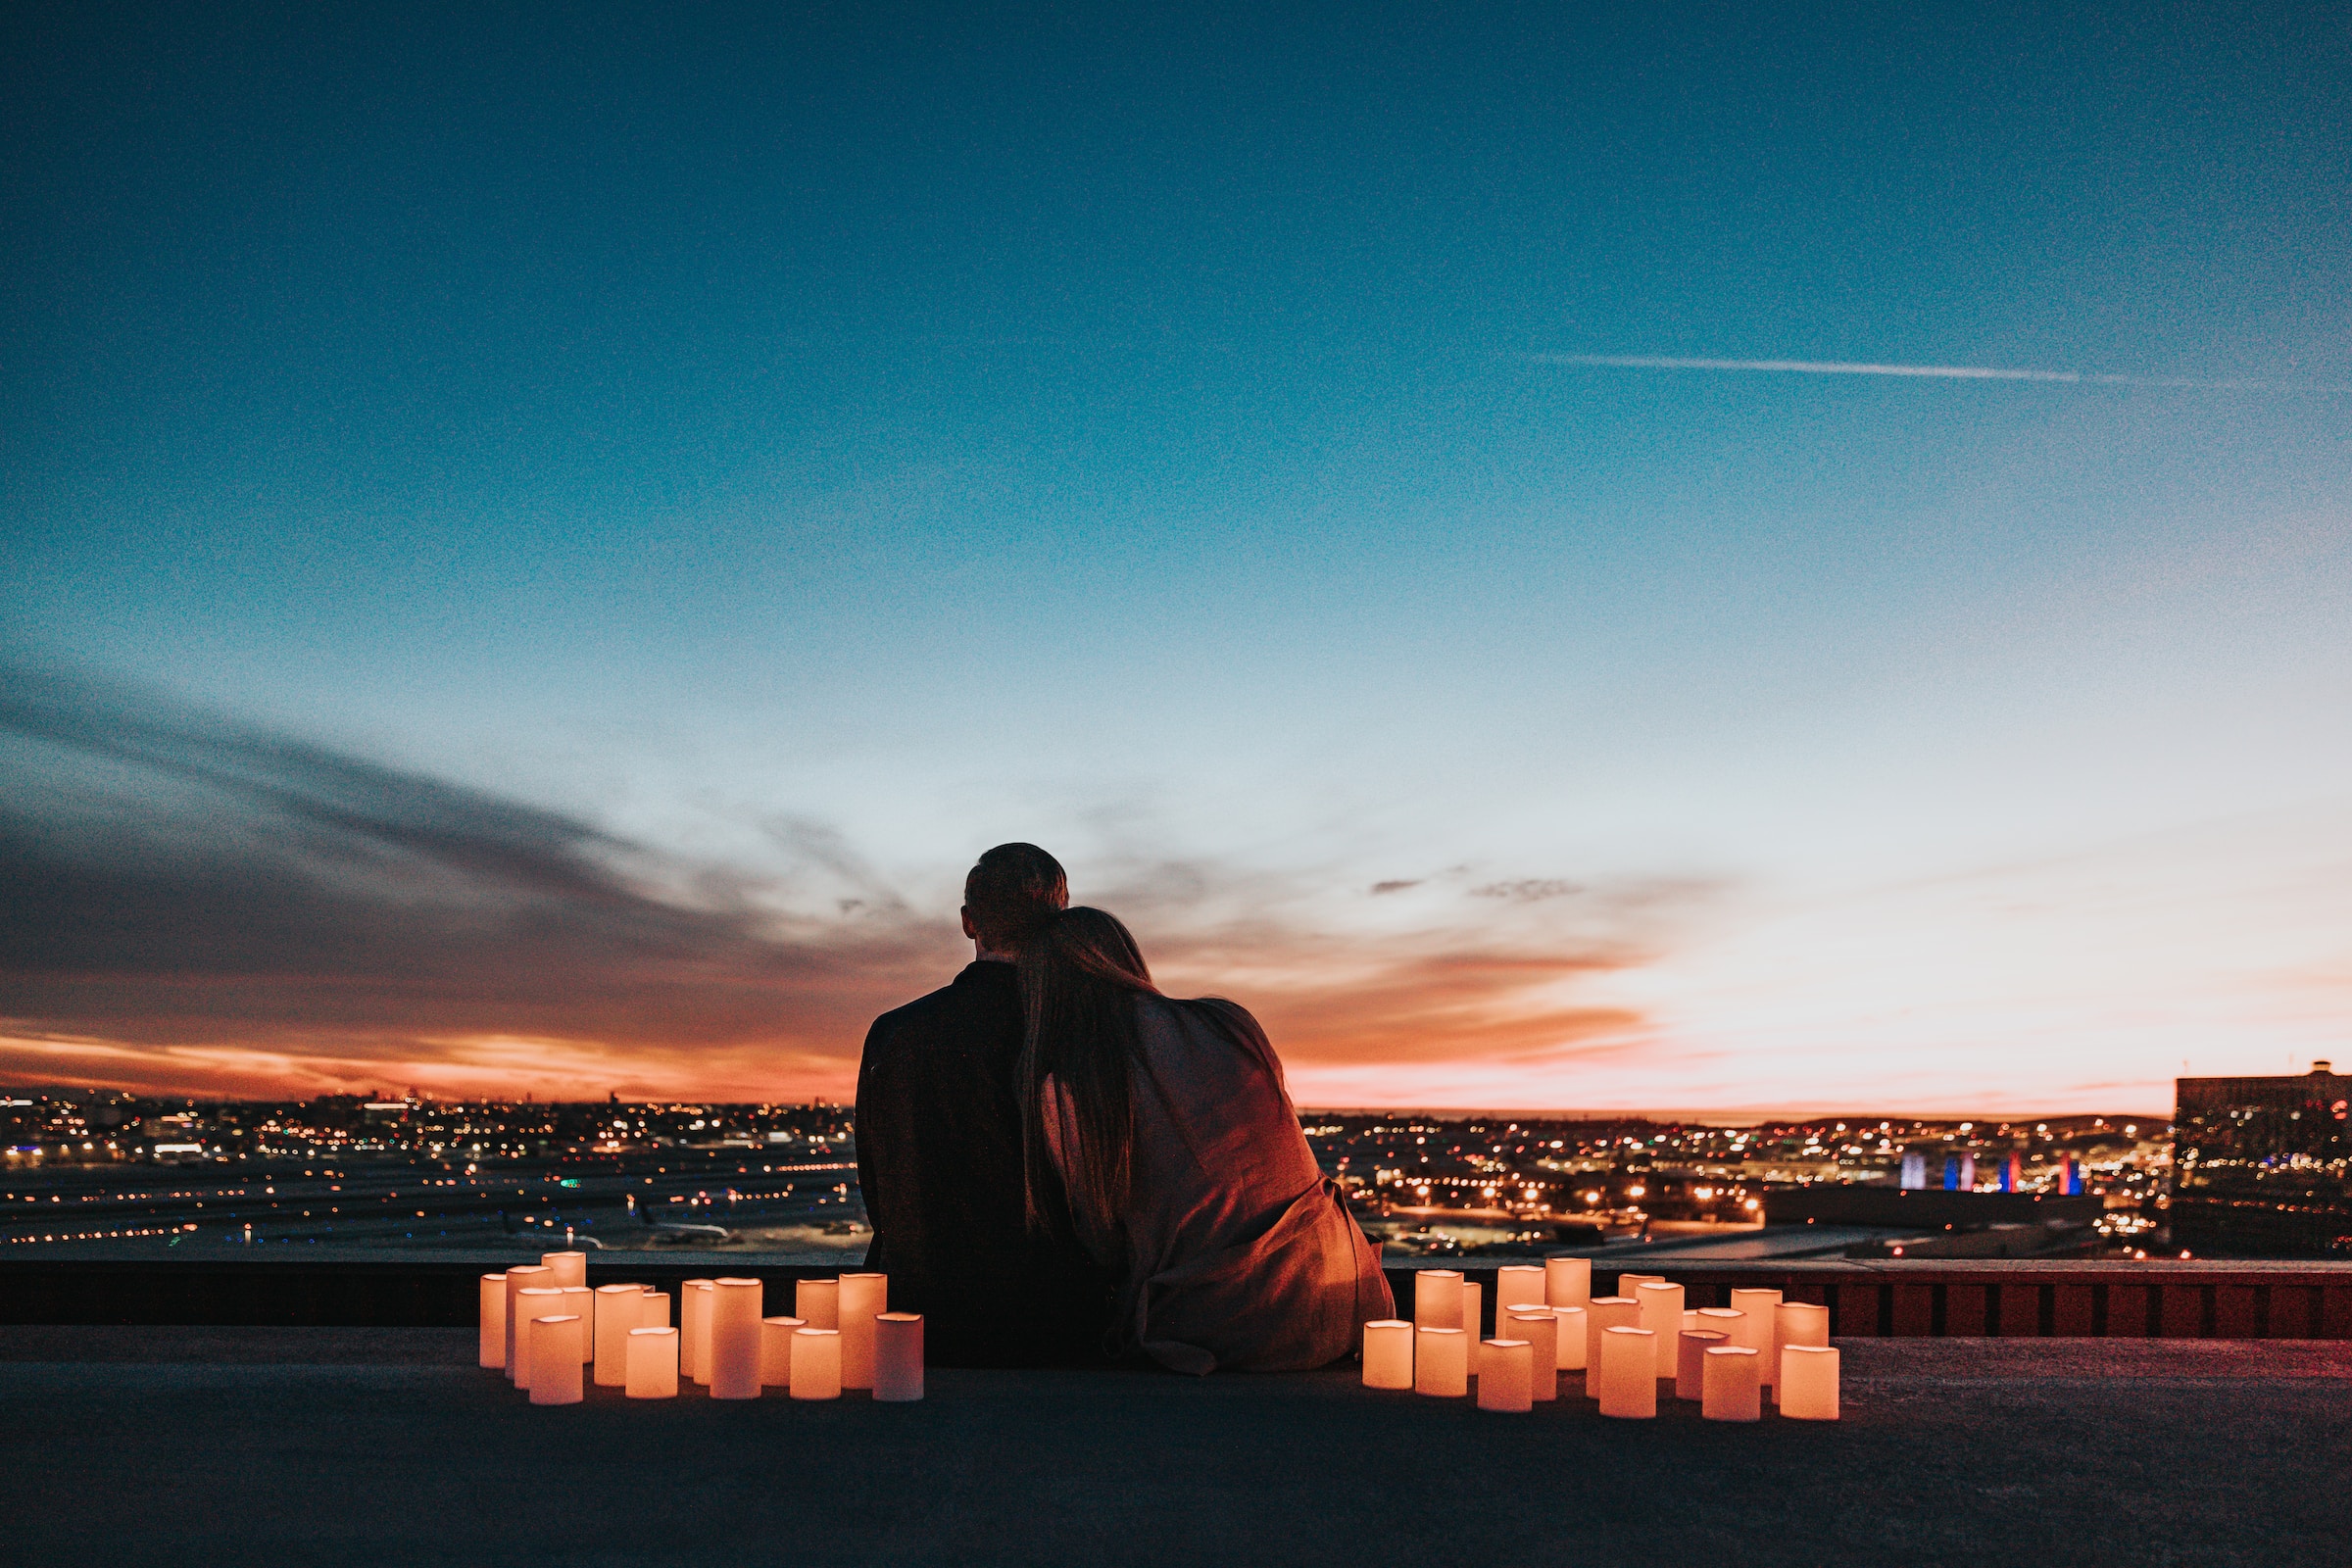 Woman leaning on a man's shoulder, surrounded by candle lights and overling the city. | Source: Unsplash